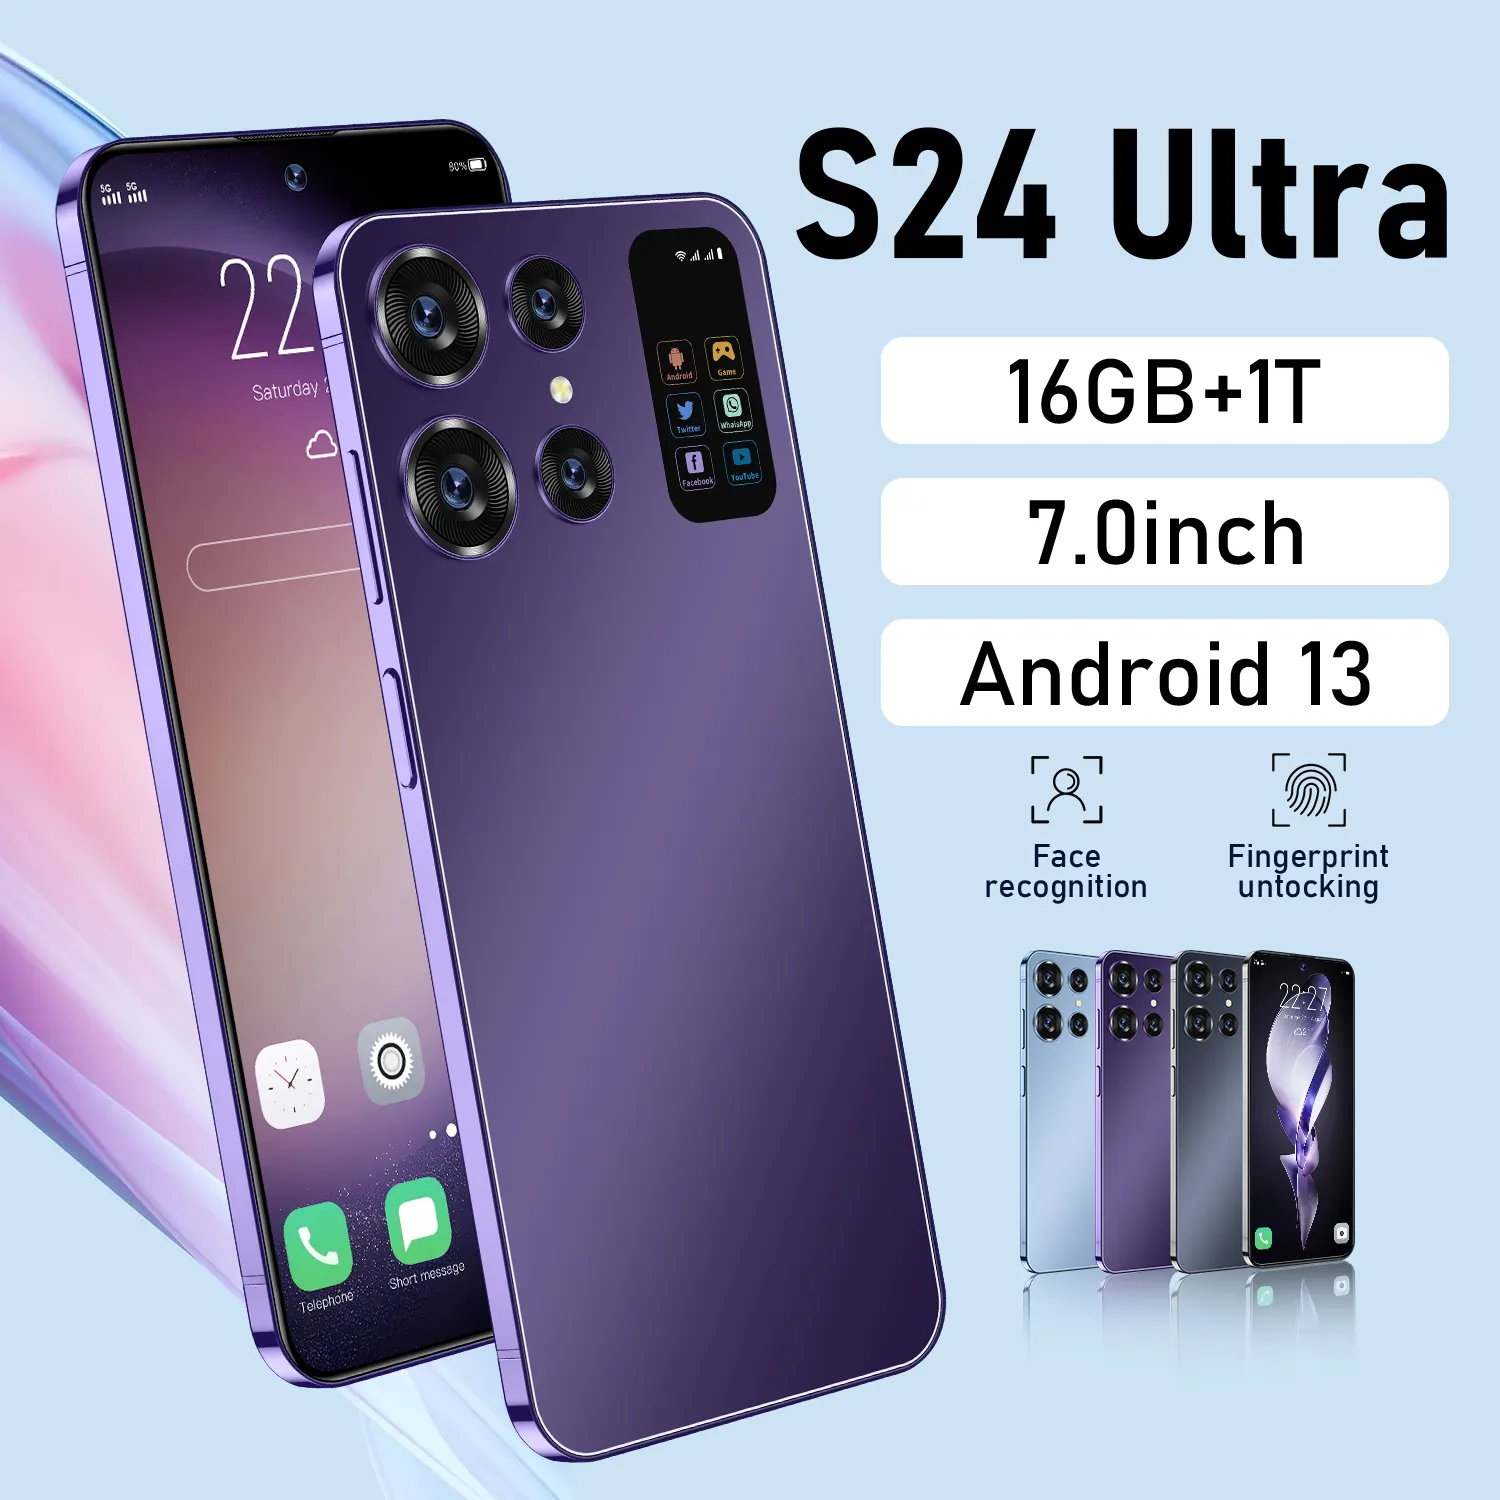 Hot deals brand new phone S24 ultra 16g+1T Smartphone7.3inch Unlocked dual card 5G smartphone Android Mobile phones